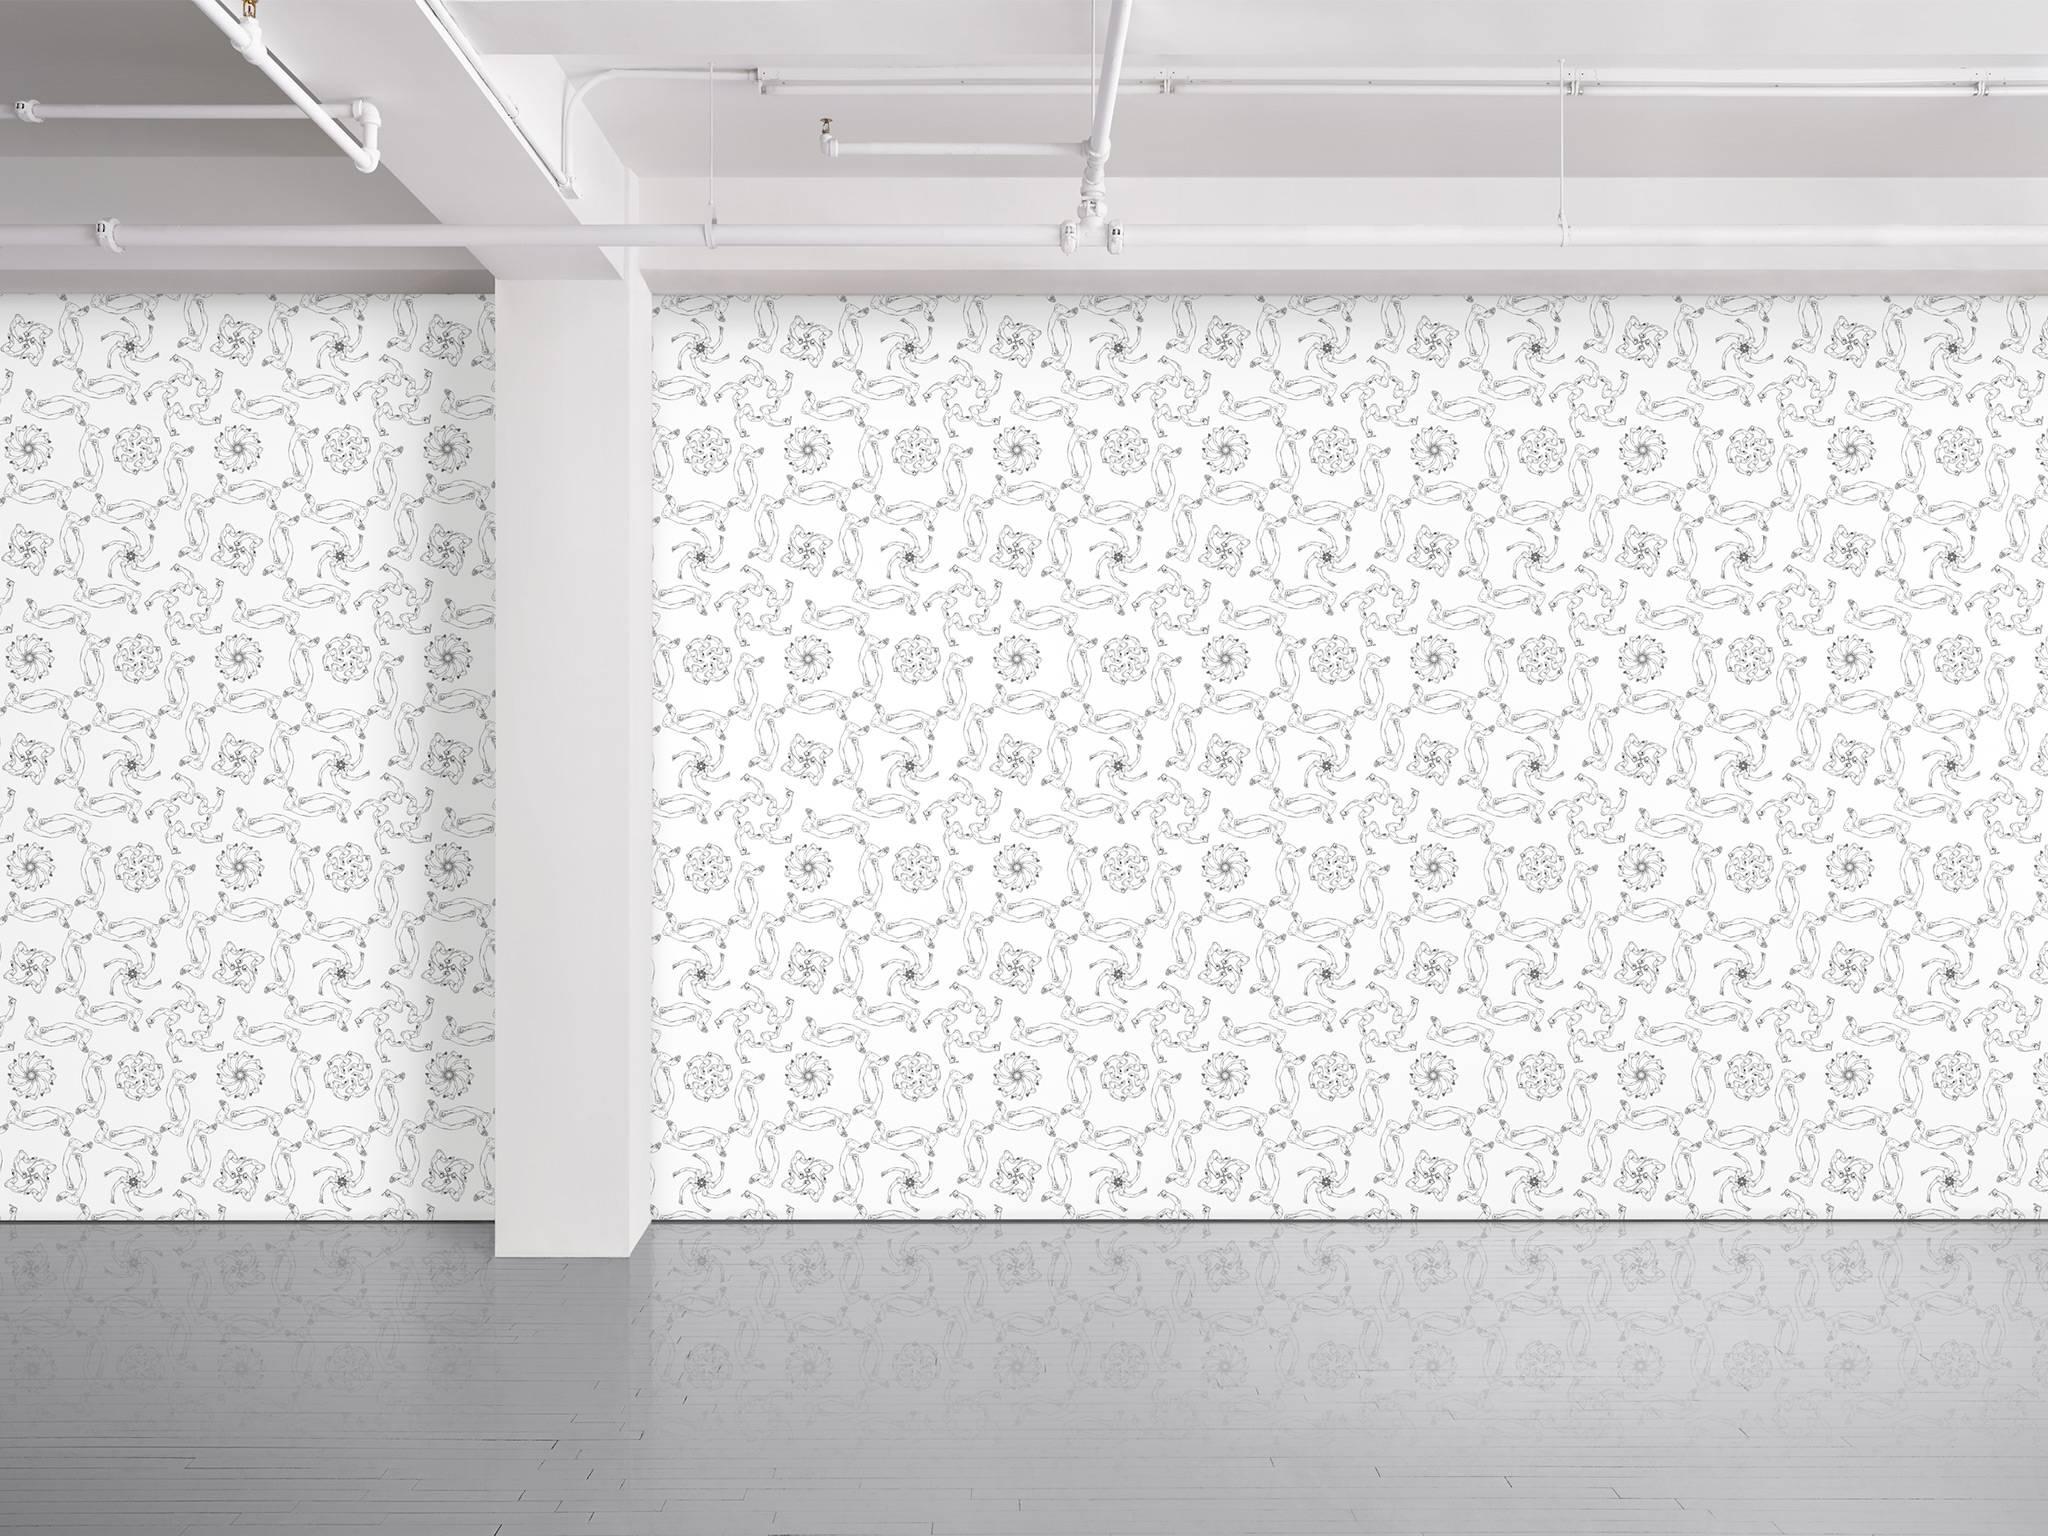 Maharam Serpentine Galleries wallpaper
Finger by Ai Weiwei 
001

Ai Weiwei is a Beijing-based artist, activist, architect, and curator whose iconoclastic works provoke commentary on the current political climate. Ai has become a cultural arbiter by